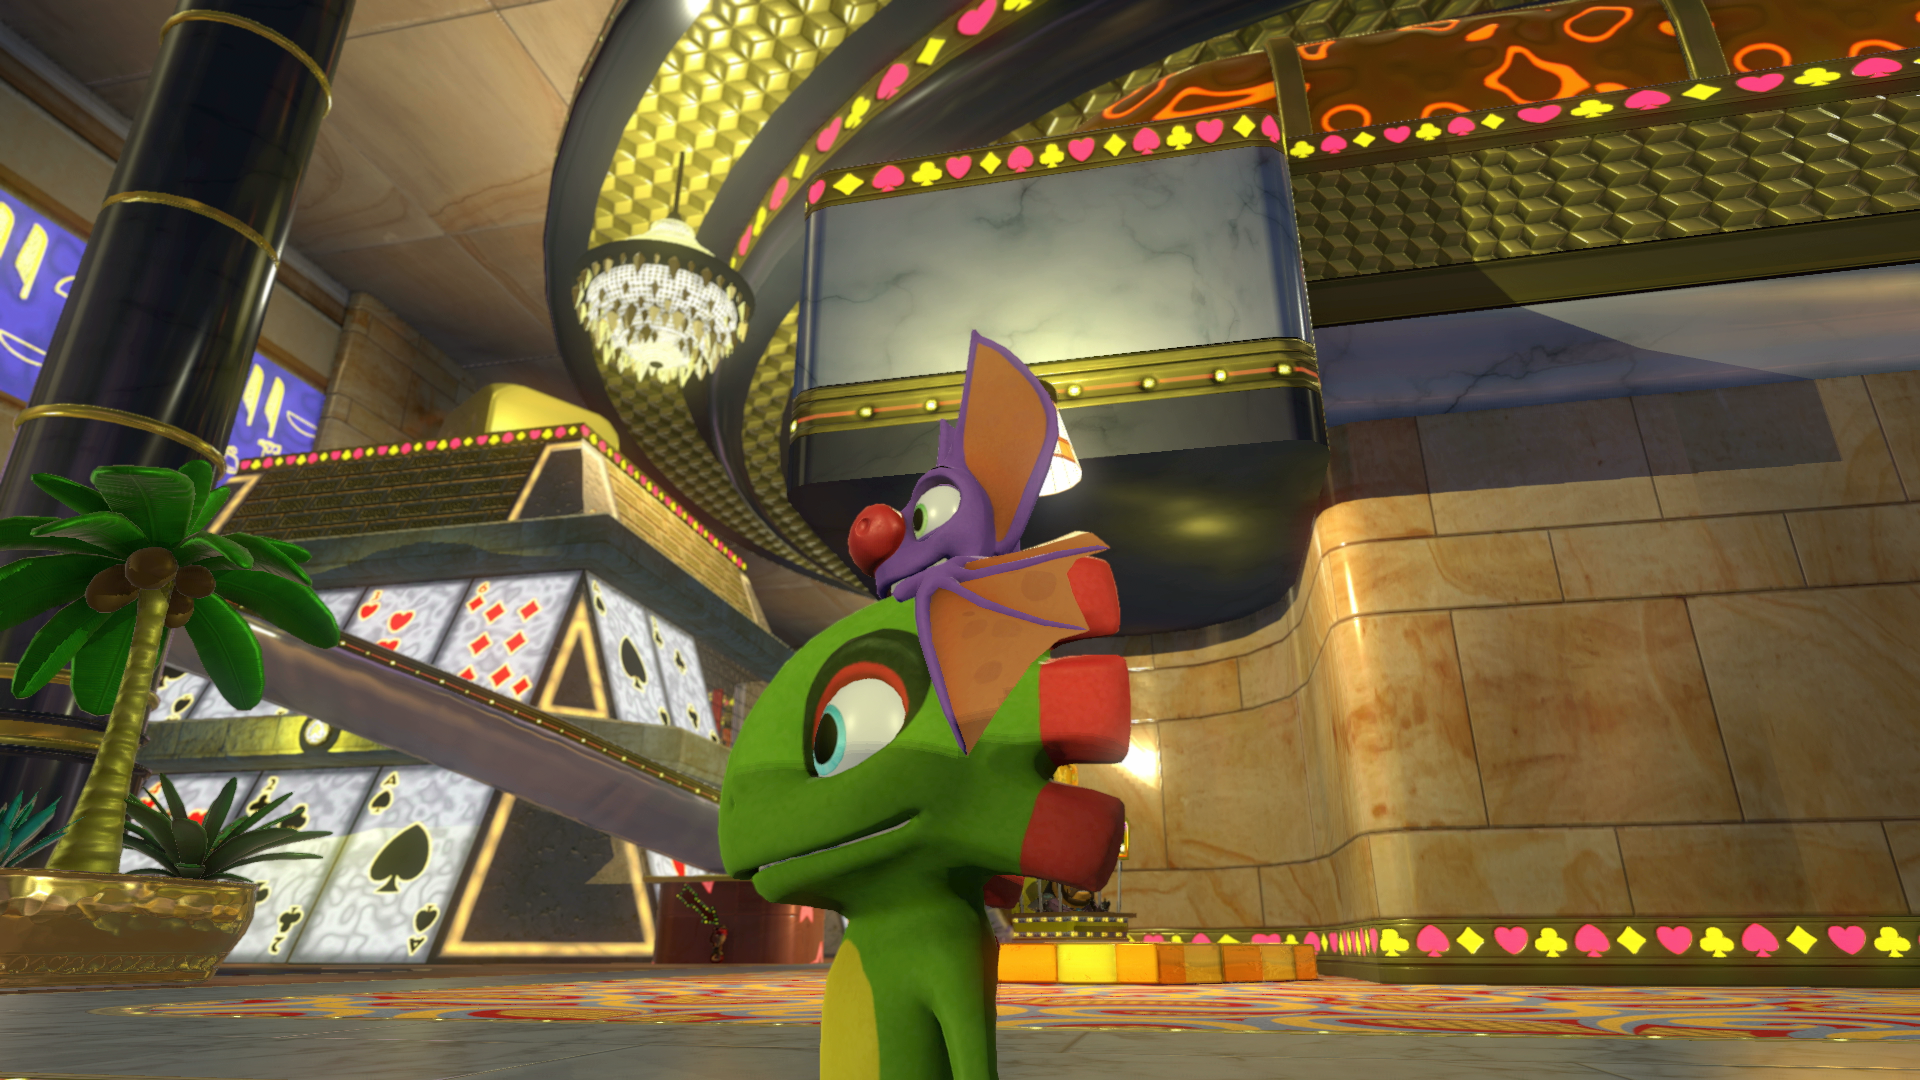 Image for Yooka Laylee Capital Cashino (Casino) - Pagie Locations, Hurdle Hijinx, INEPT World 4 Boss, Butterfly Heart, Power Extender, Play Coin, Mollycool